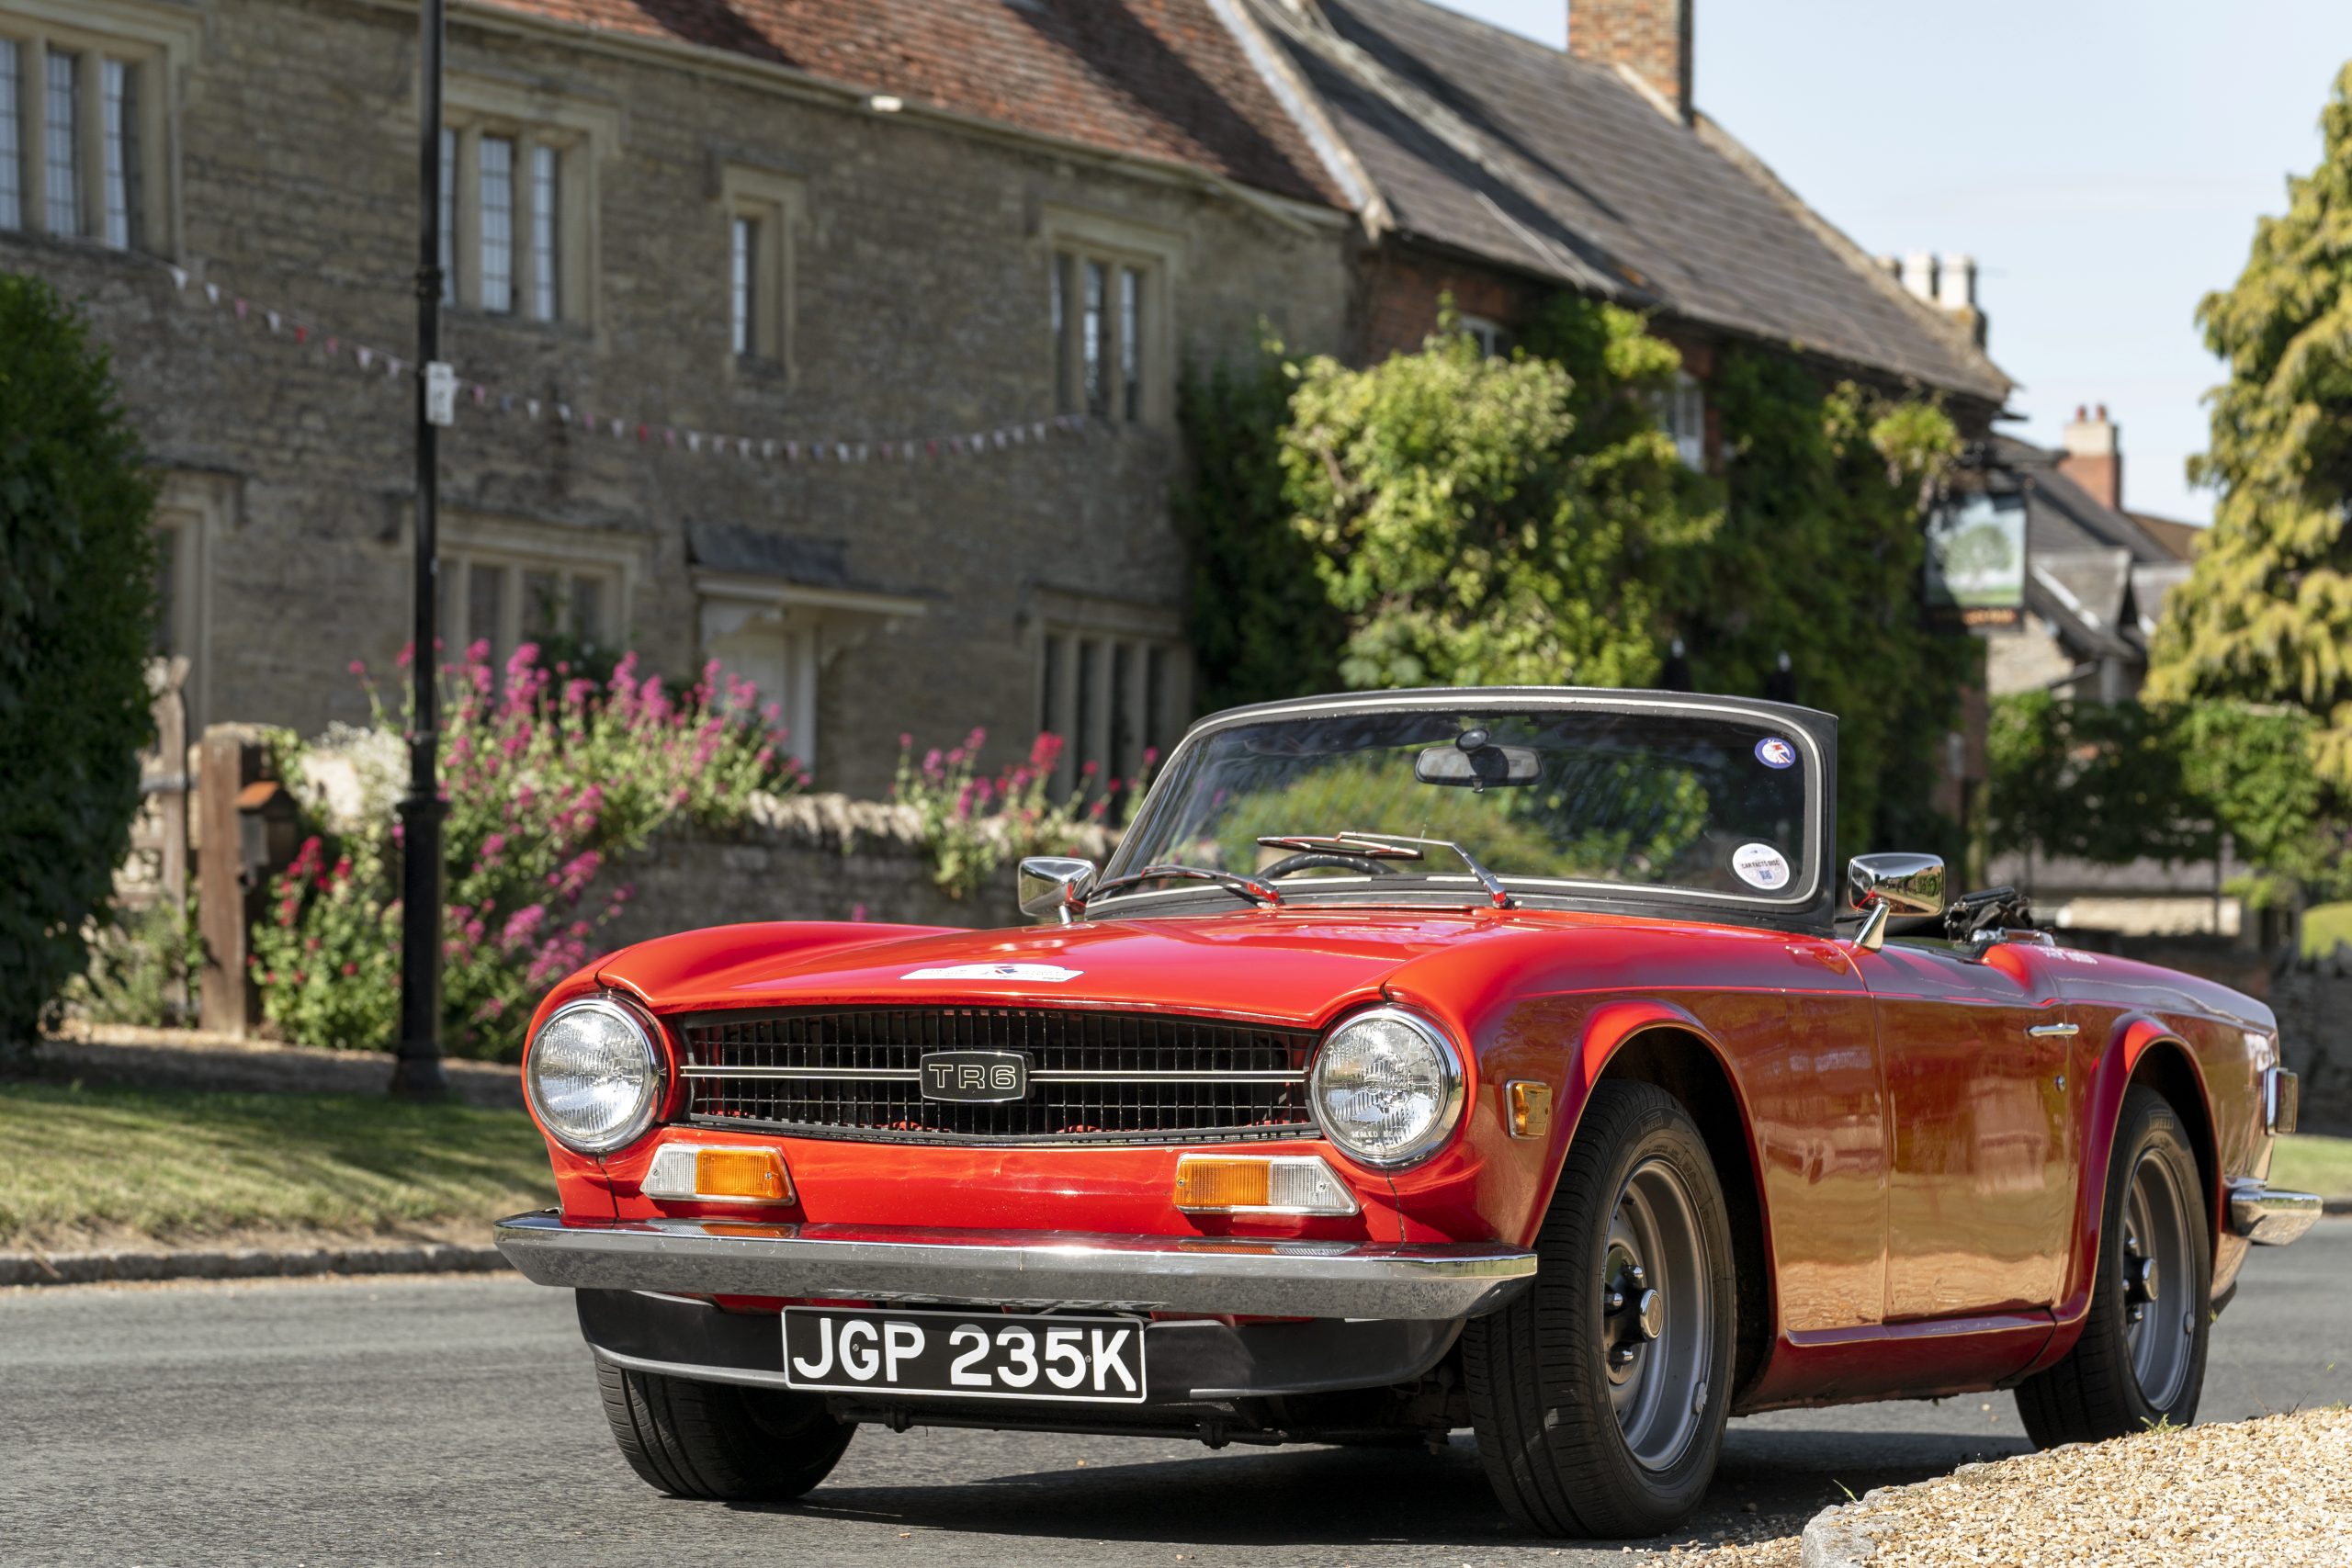 Red TR6 classic car